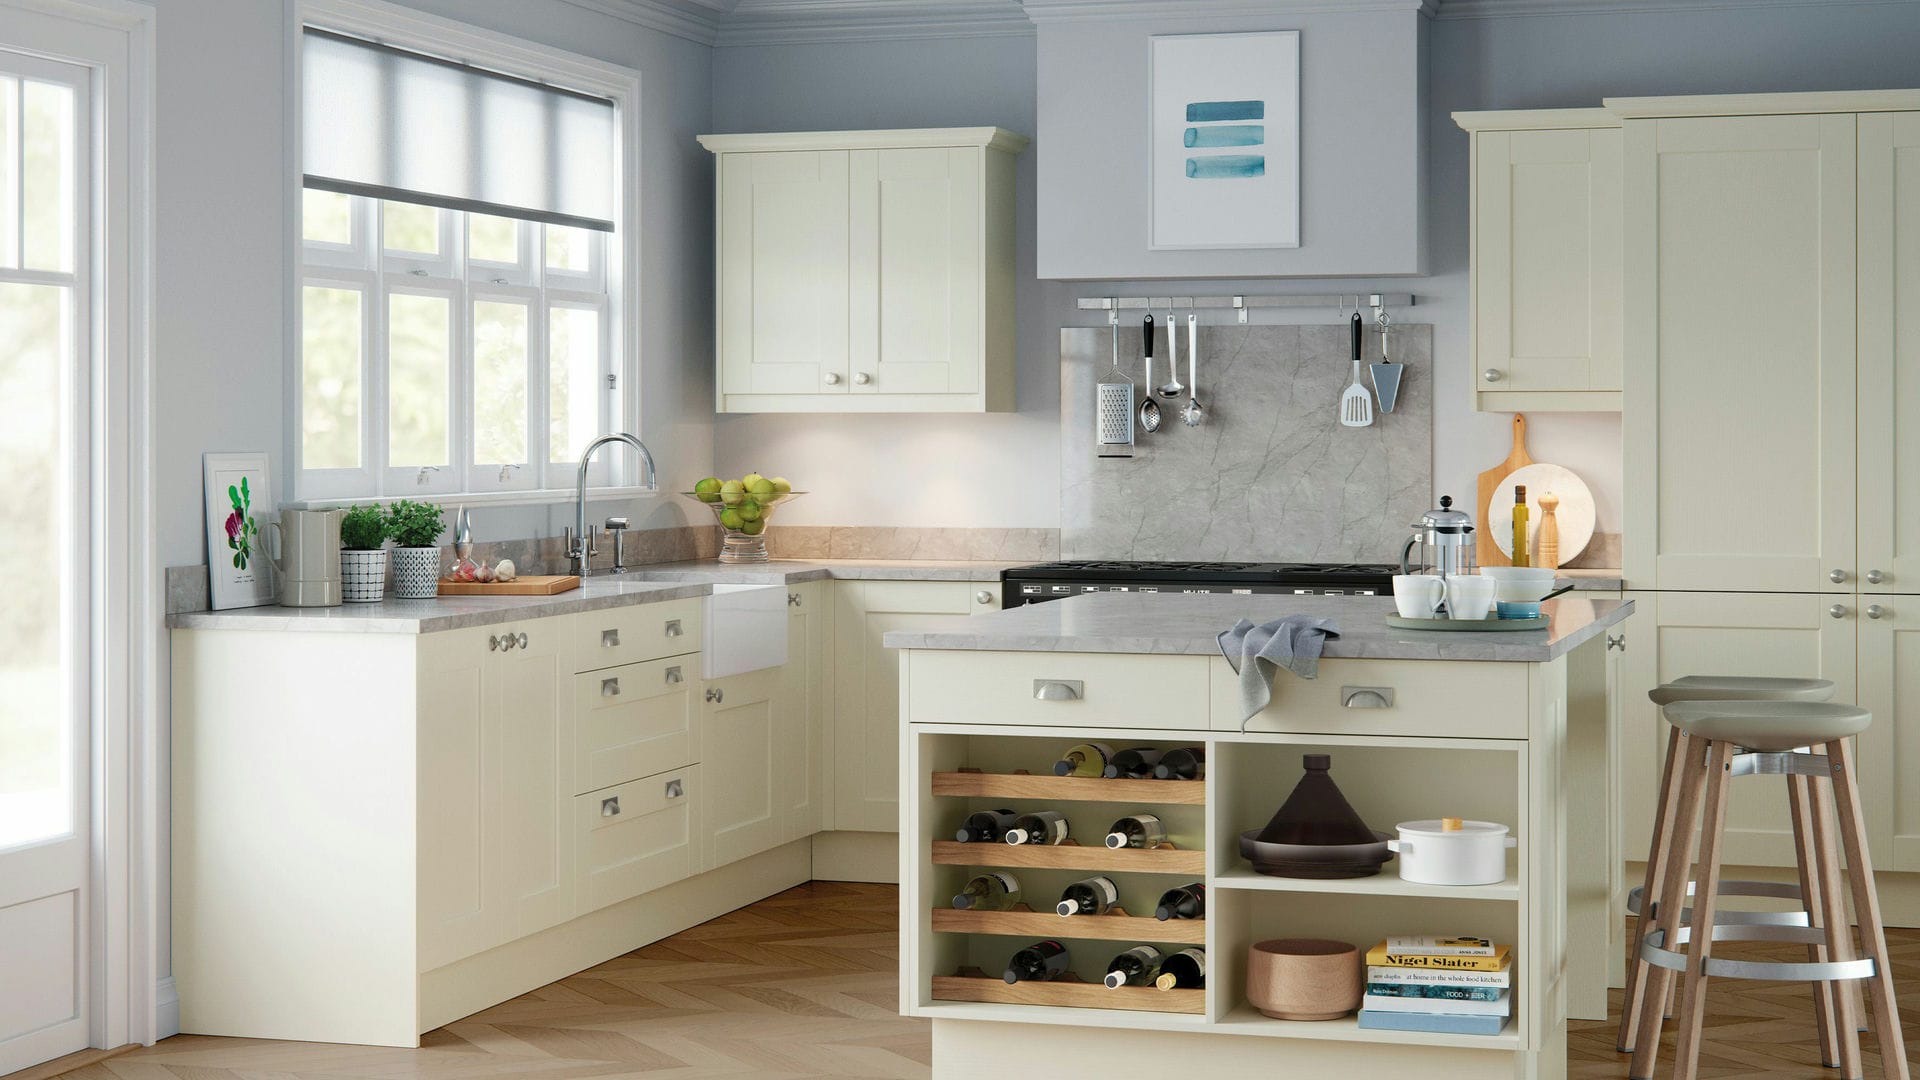 Modern shaker porcelain kitchens combining timeless shaker style with a fresh porcelain finish